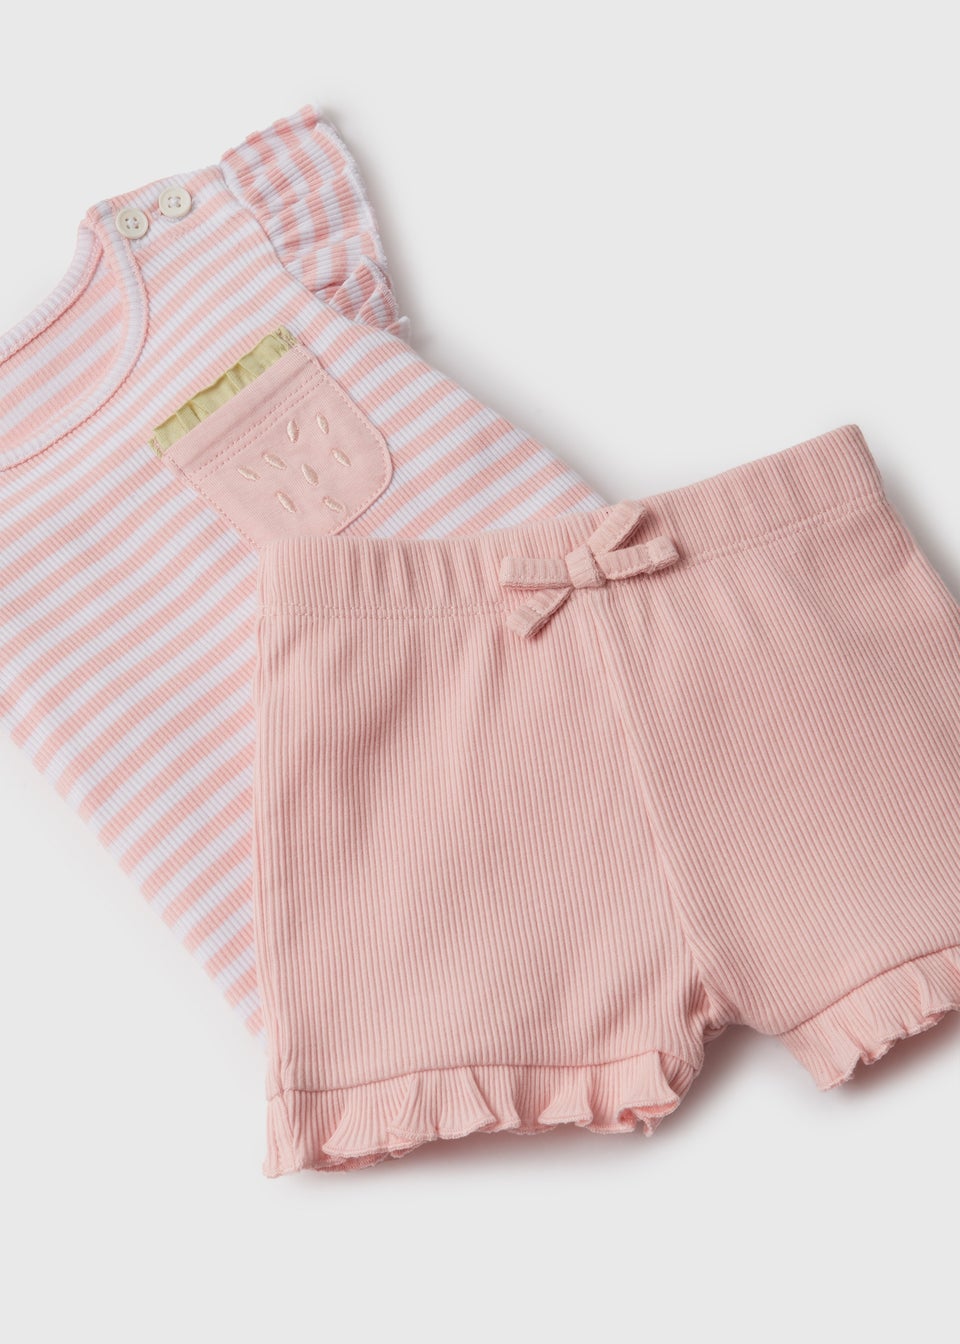 Baby Pink Strawberry Top and Short Sets (Newborn-23mths)